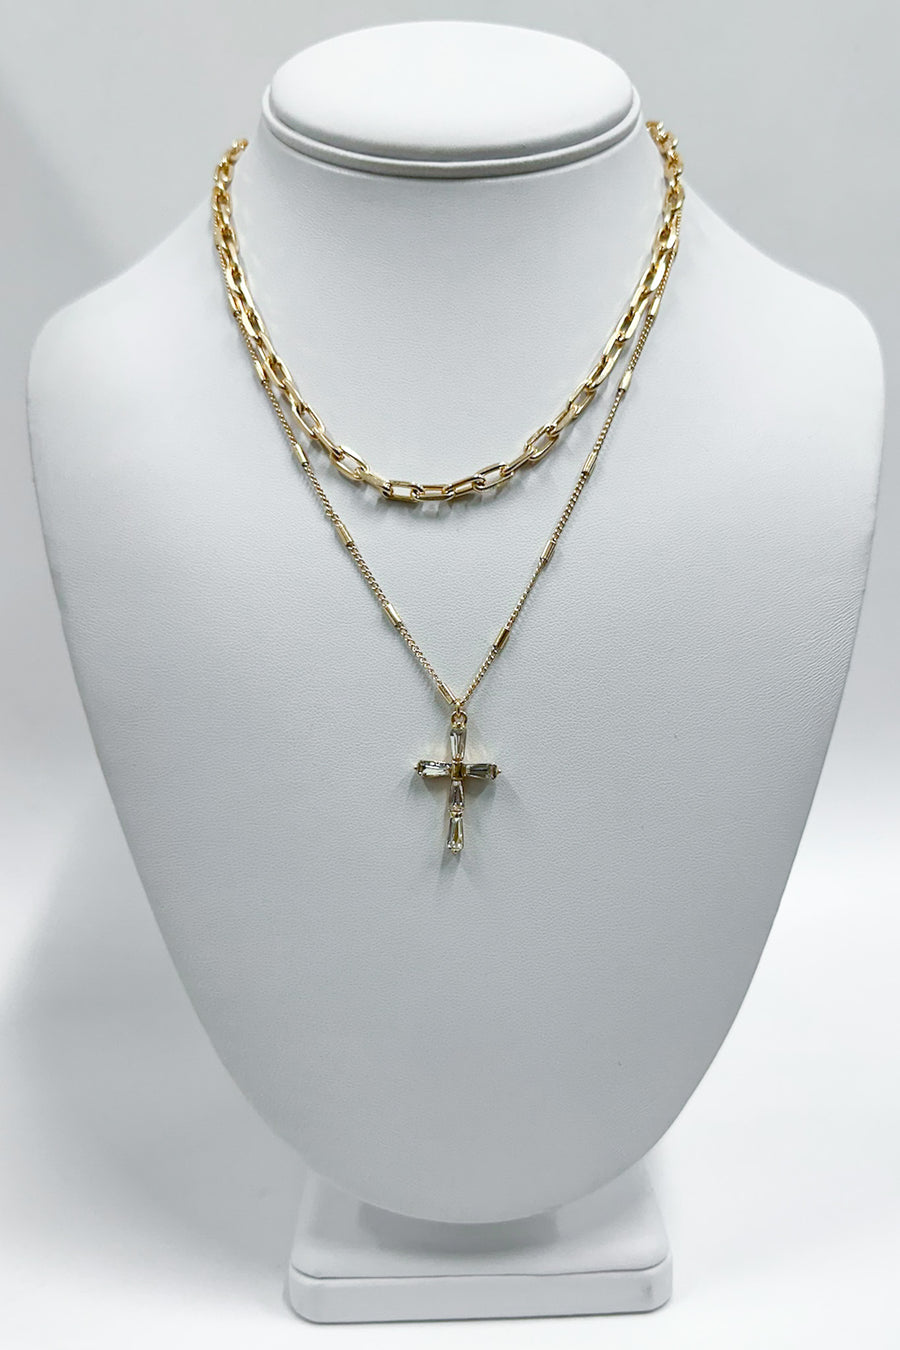 Gold Glimmering Serenity Rhinestone Cross Charm Necklace - Madison and Mallory